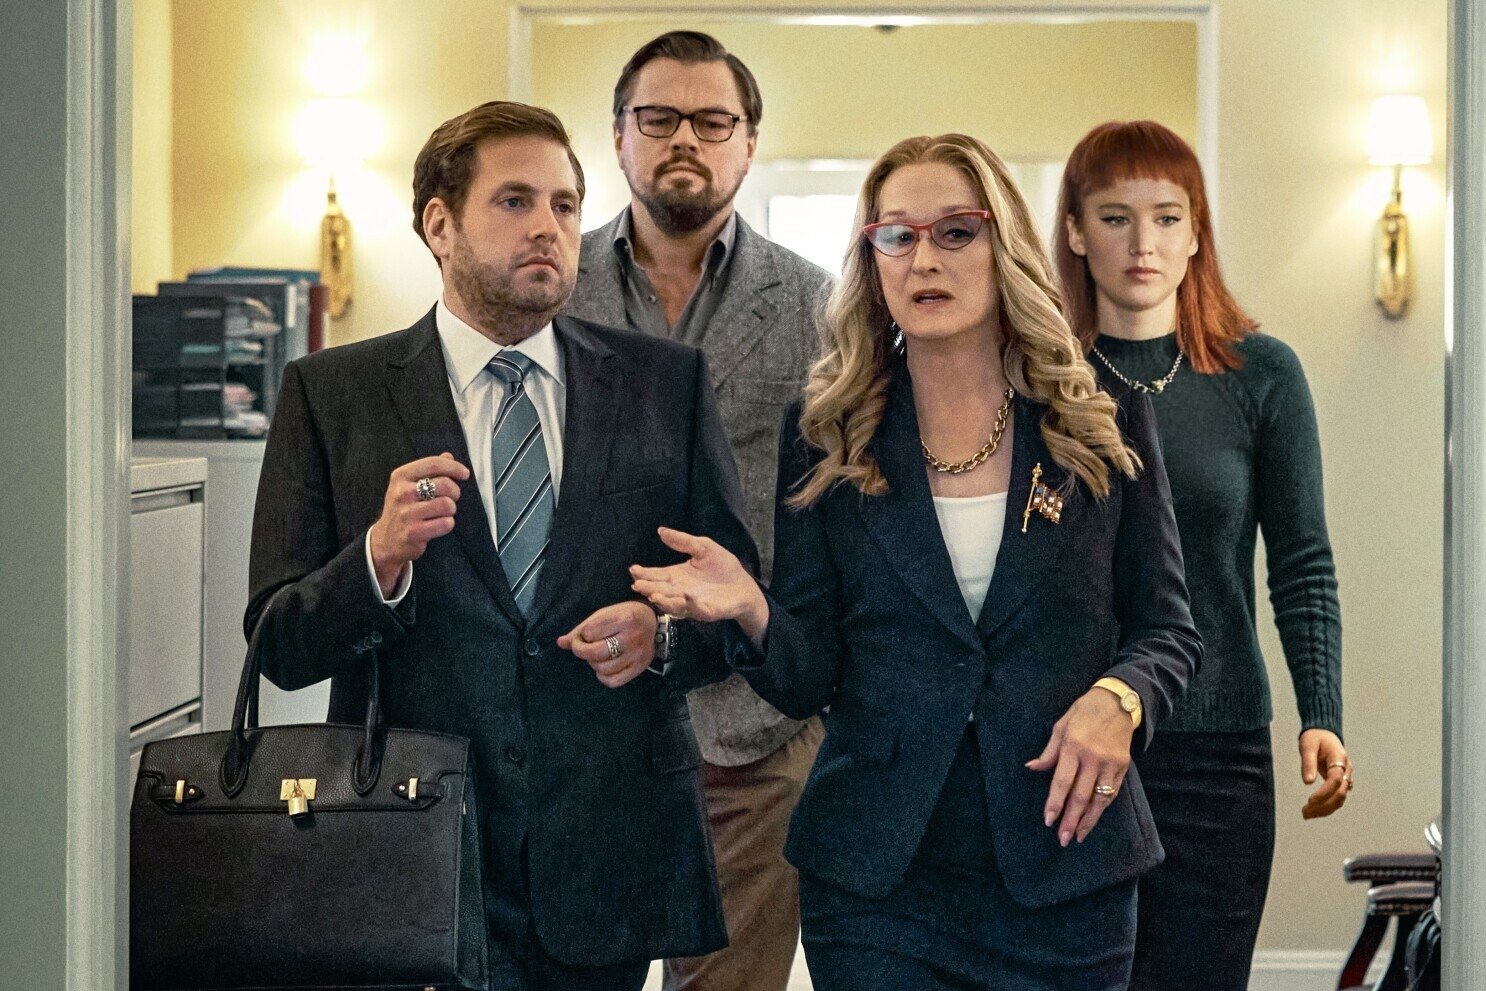 From left to right, Jonah Hill, Leonardo DiCaprio, Meryl Streep and Jennifer Lawrence in a still shot from "Don&#039;t Look Up". 